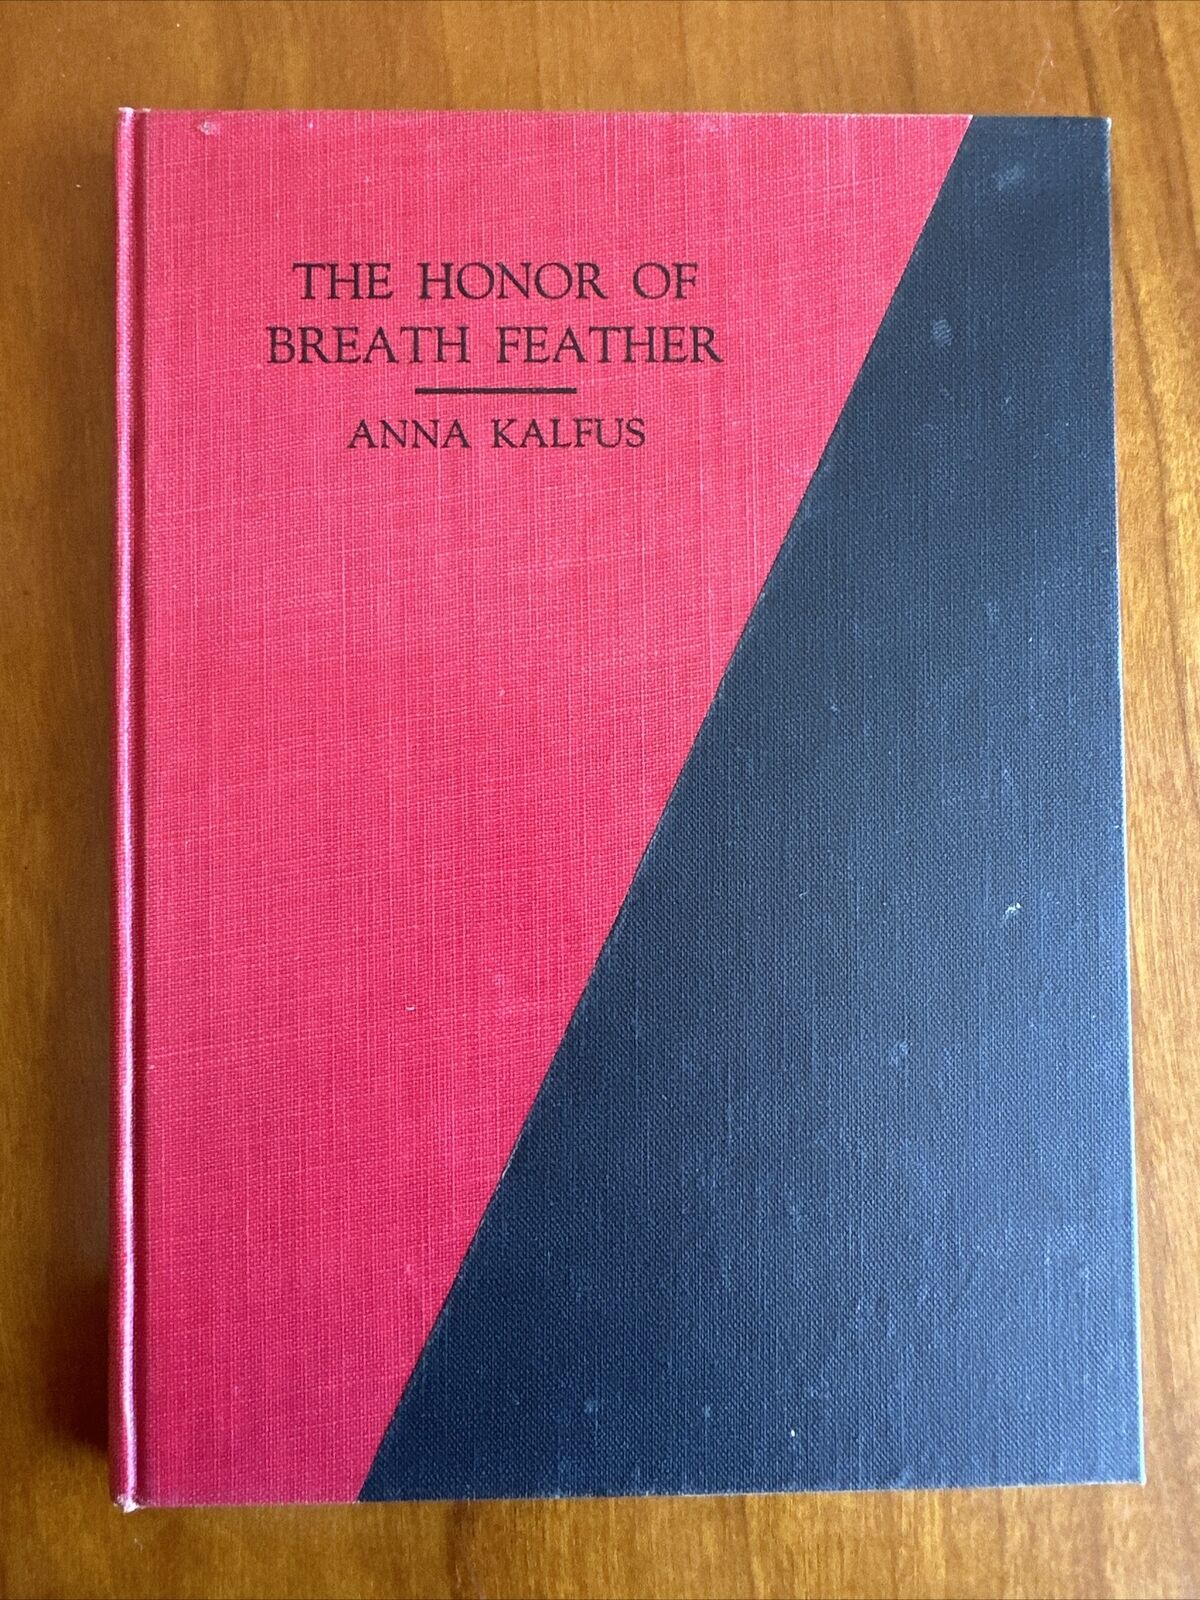 The Honor Of Breath Feather By Anna Kalfus 